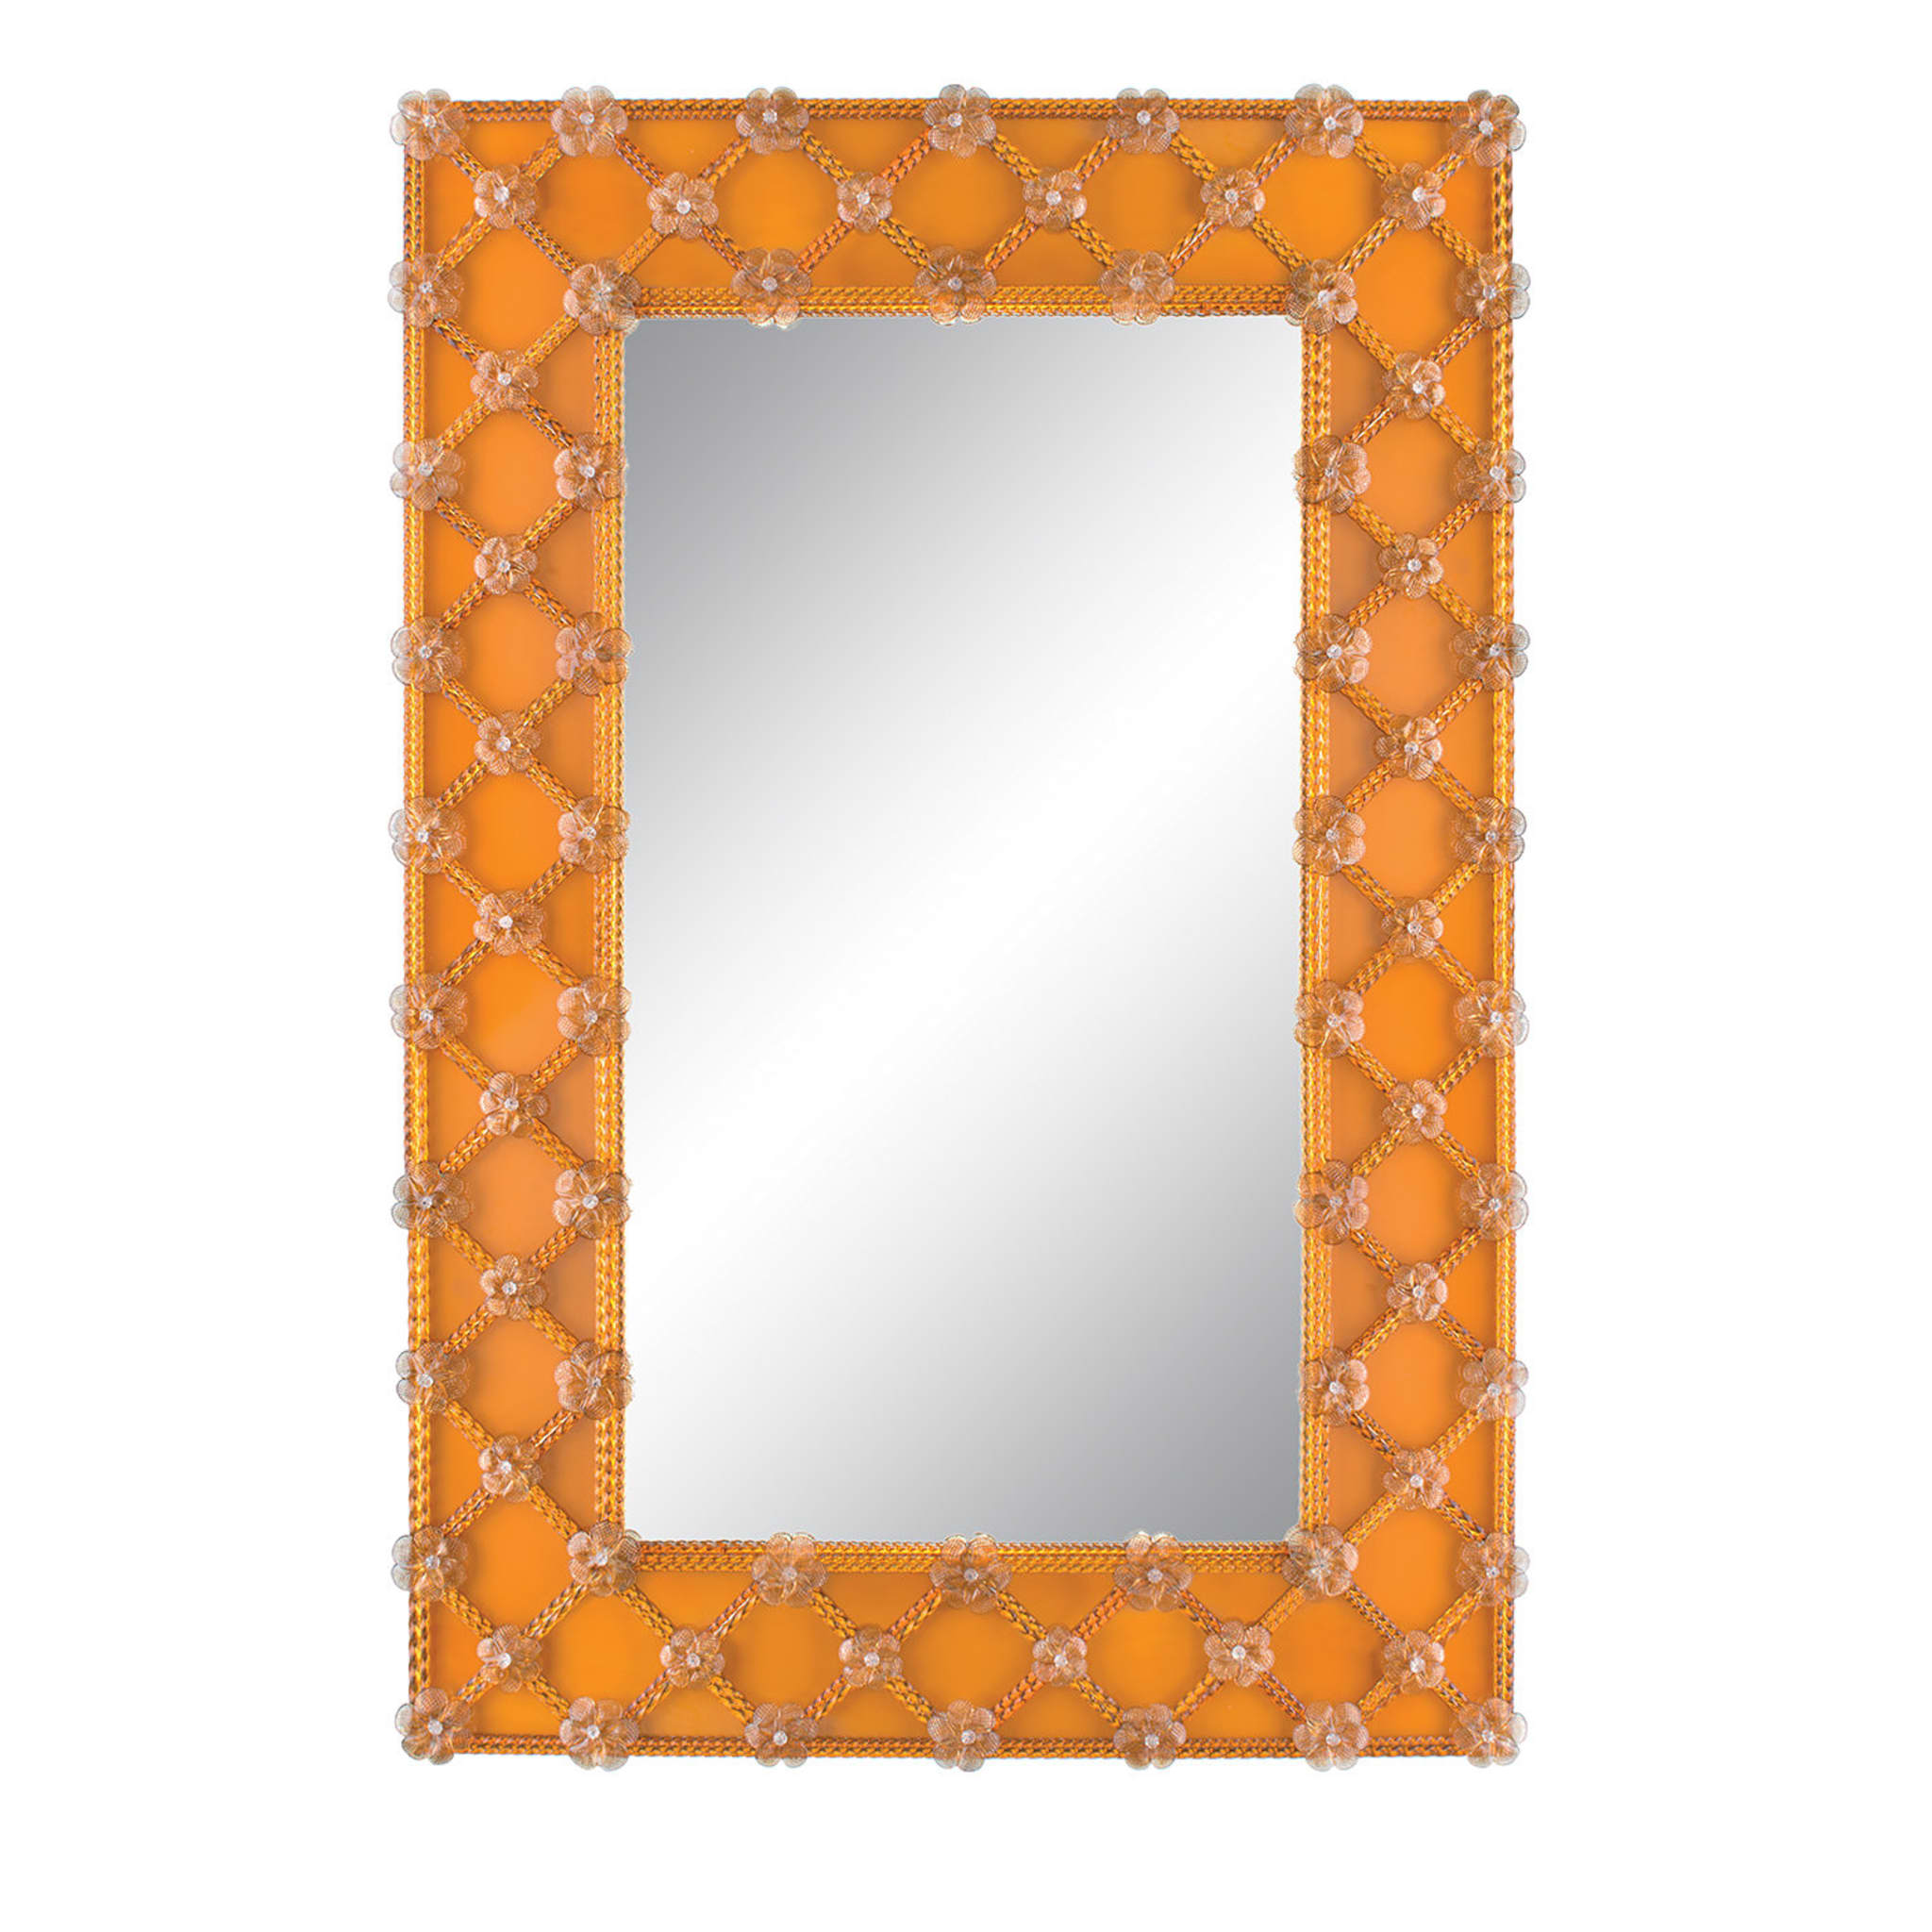 Luce Small mirror, Mirrors, Bedroom Furniture